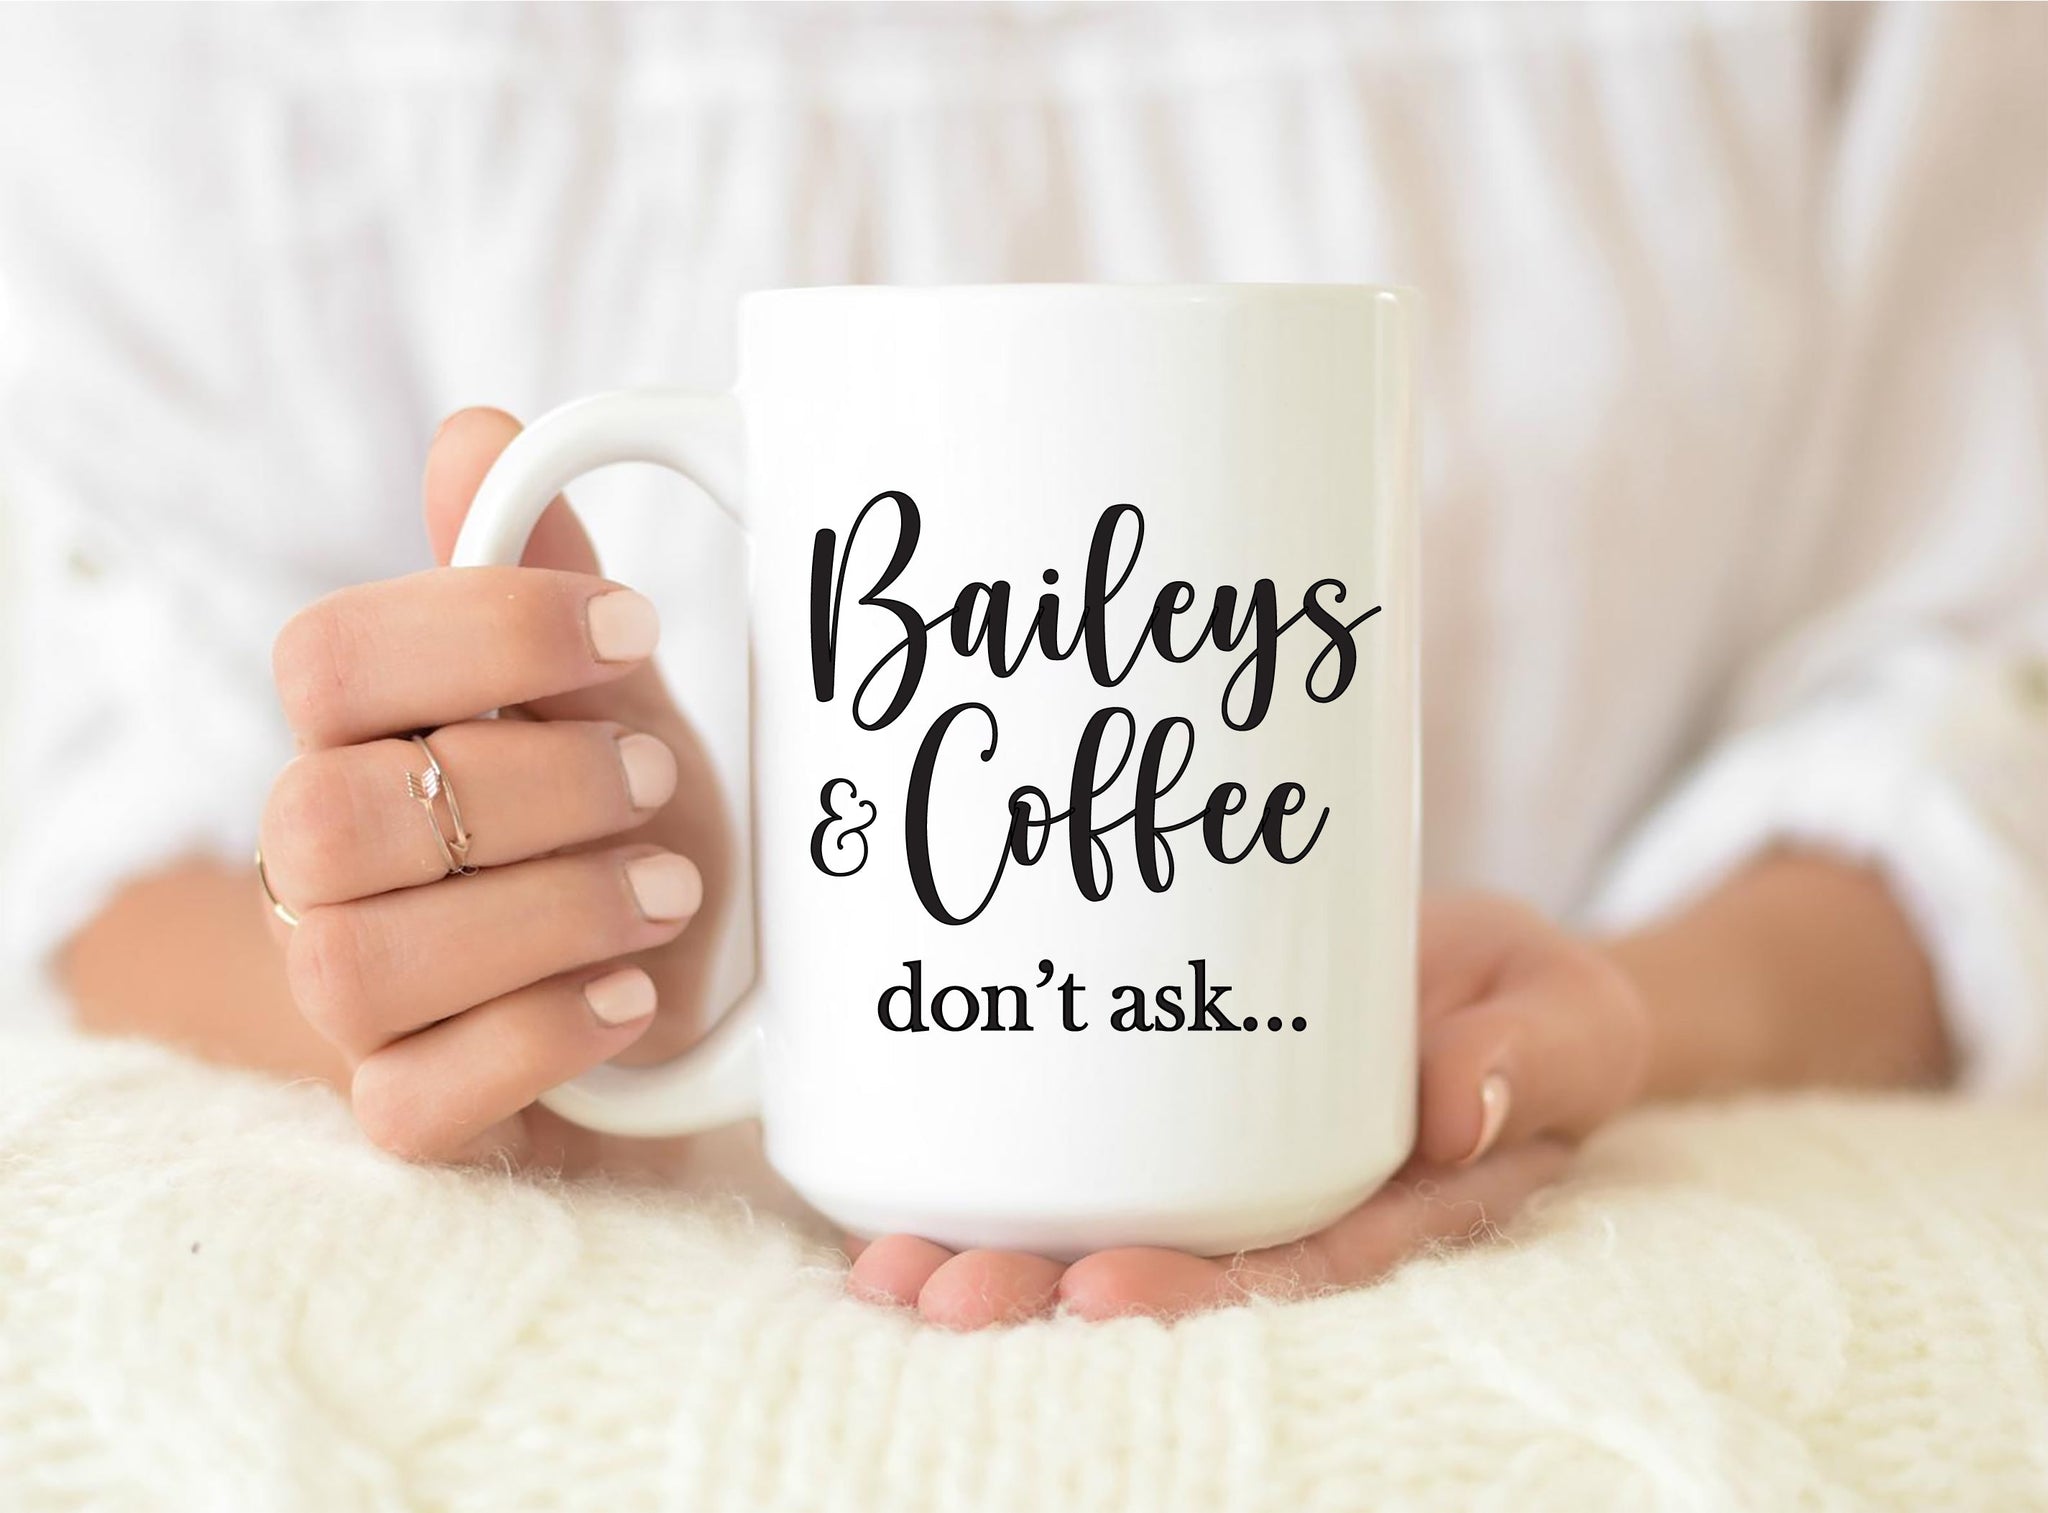 funny personalized gifts for mom coffee mug